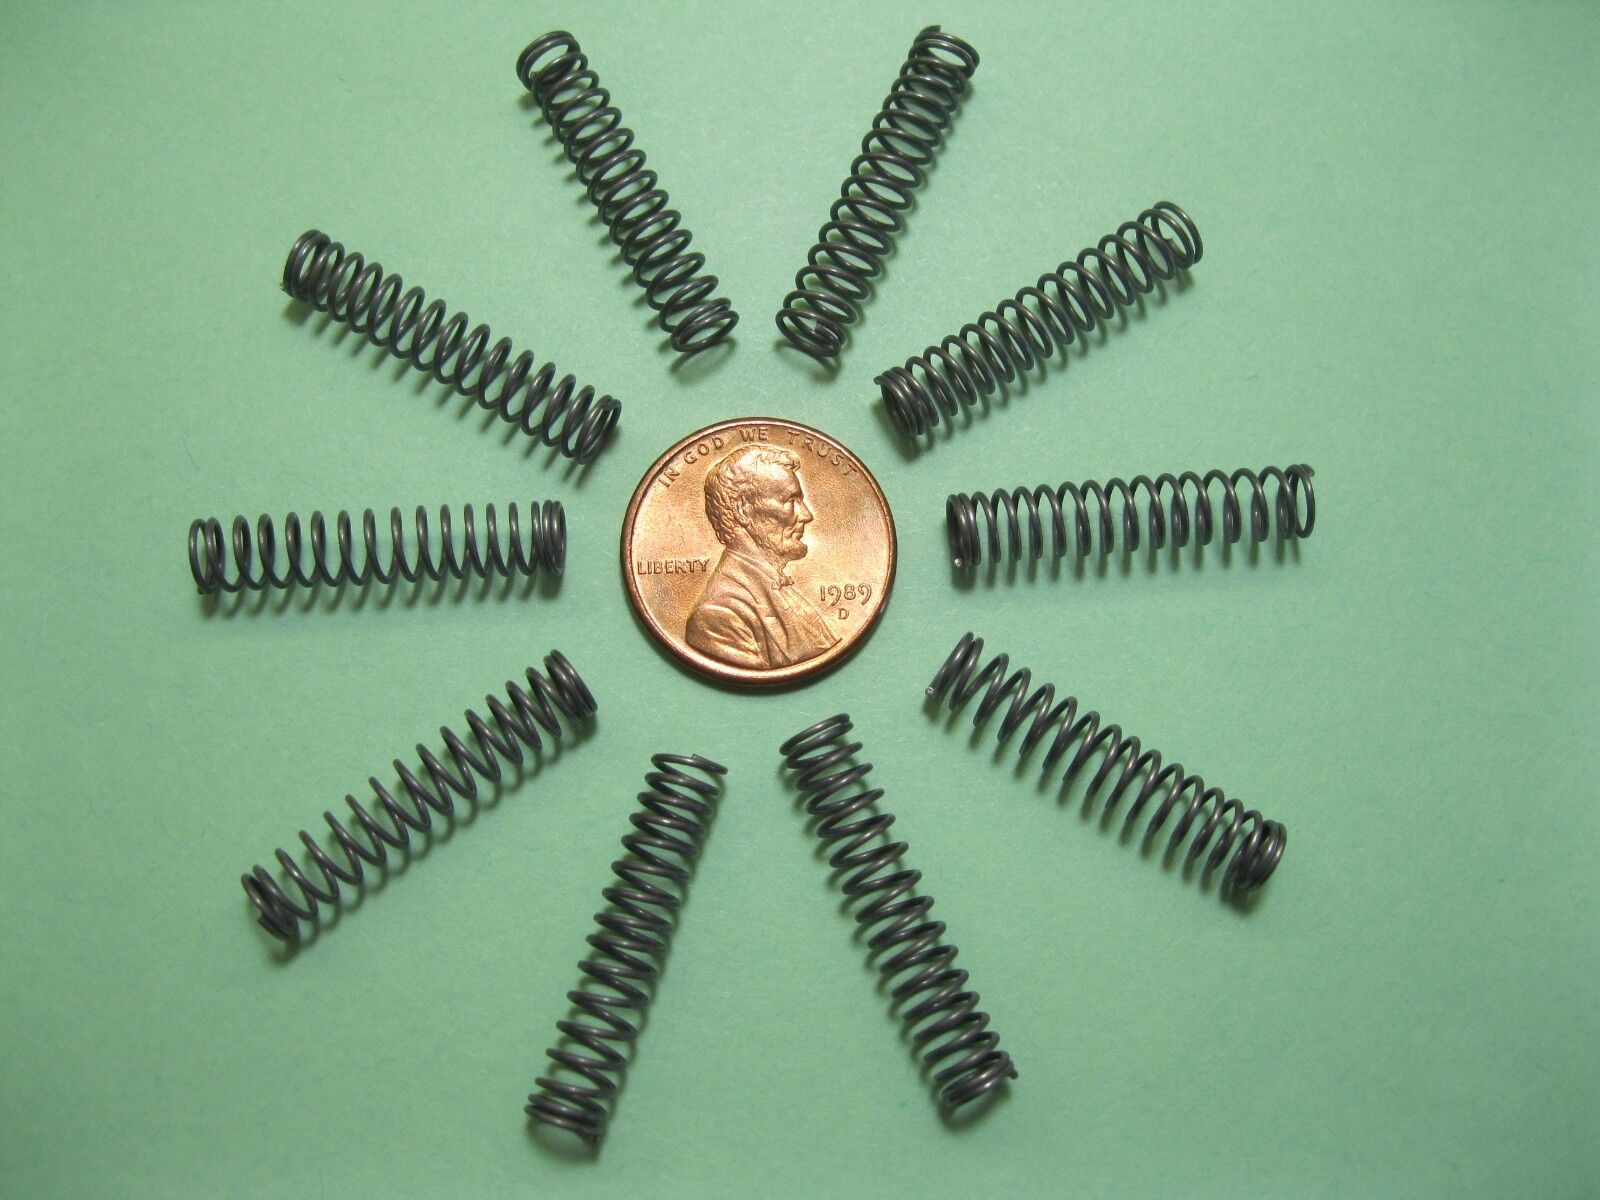 10 Pcs Small Compression Springs  1 in. (25 mm) Long x 3/16 in. (5 mm) OD